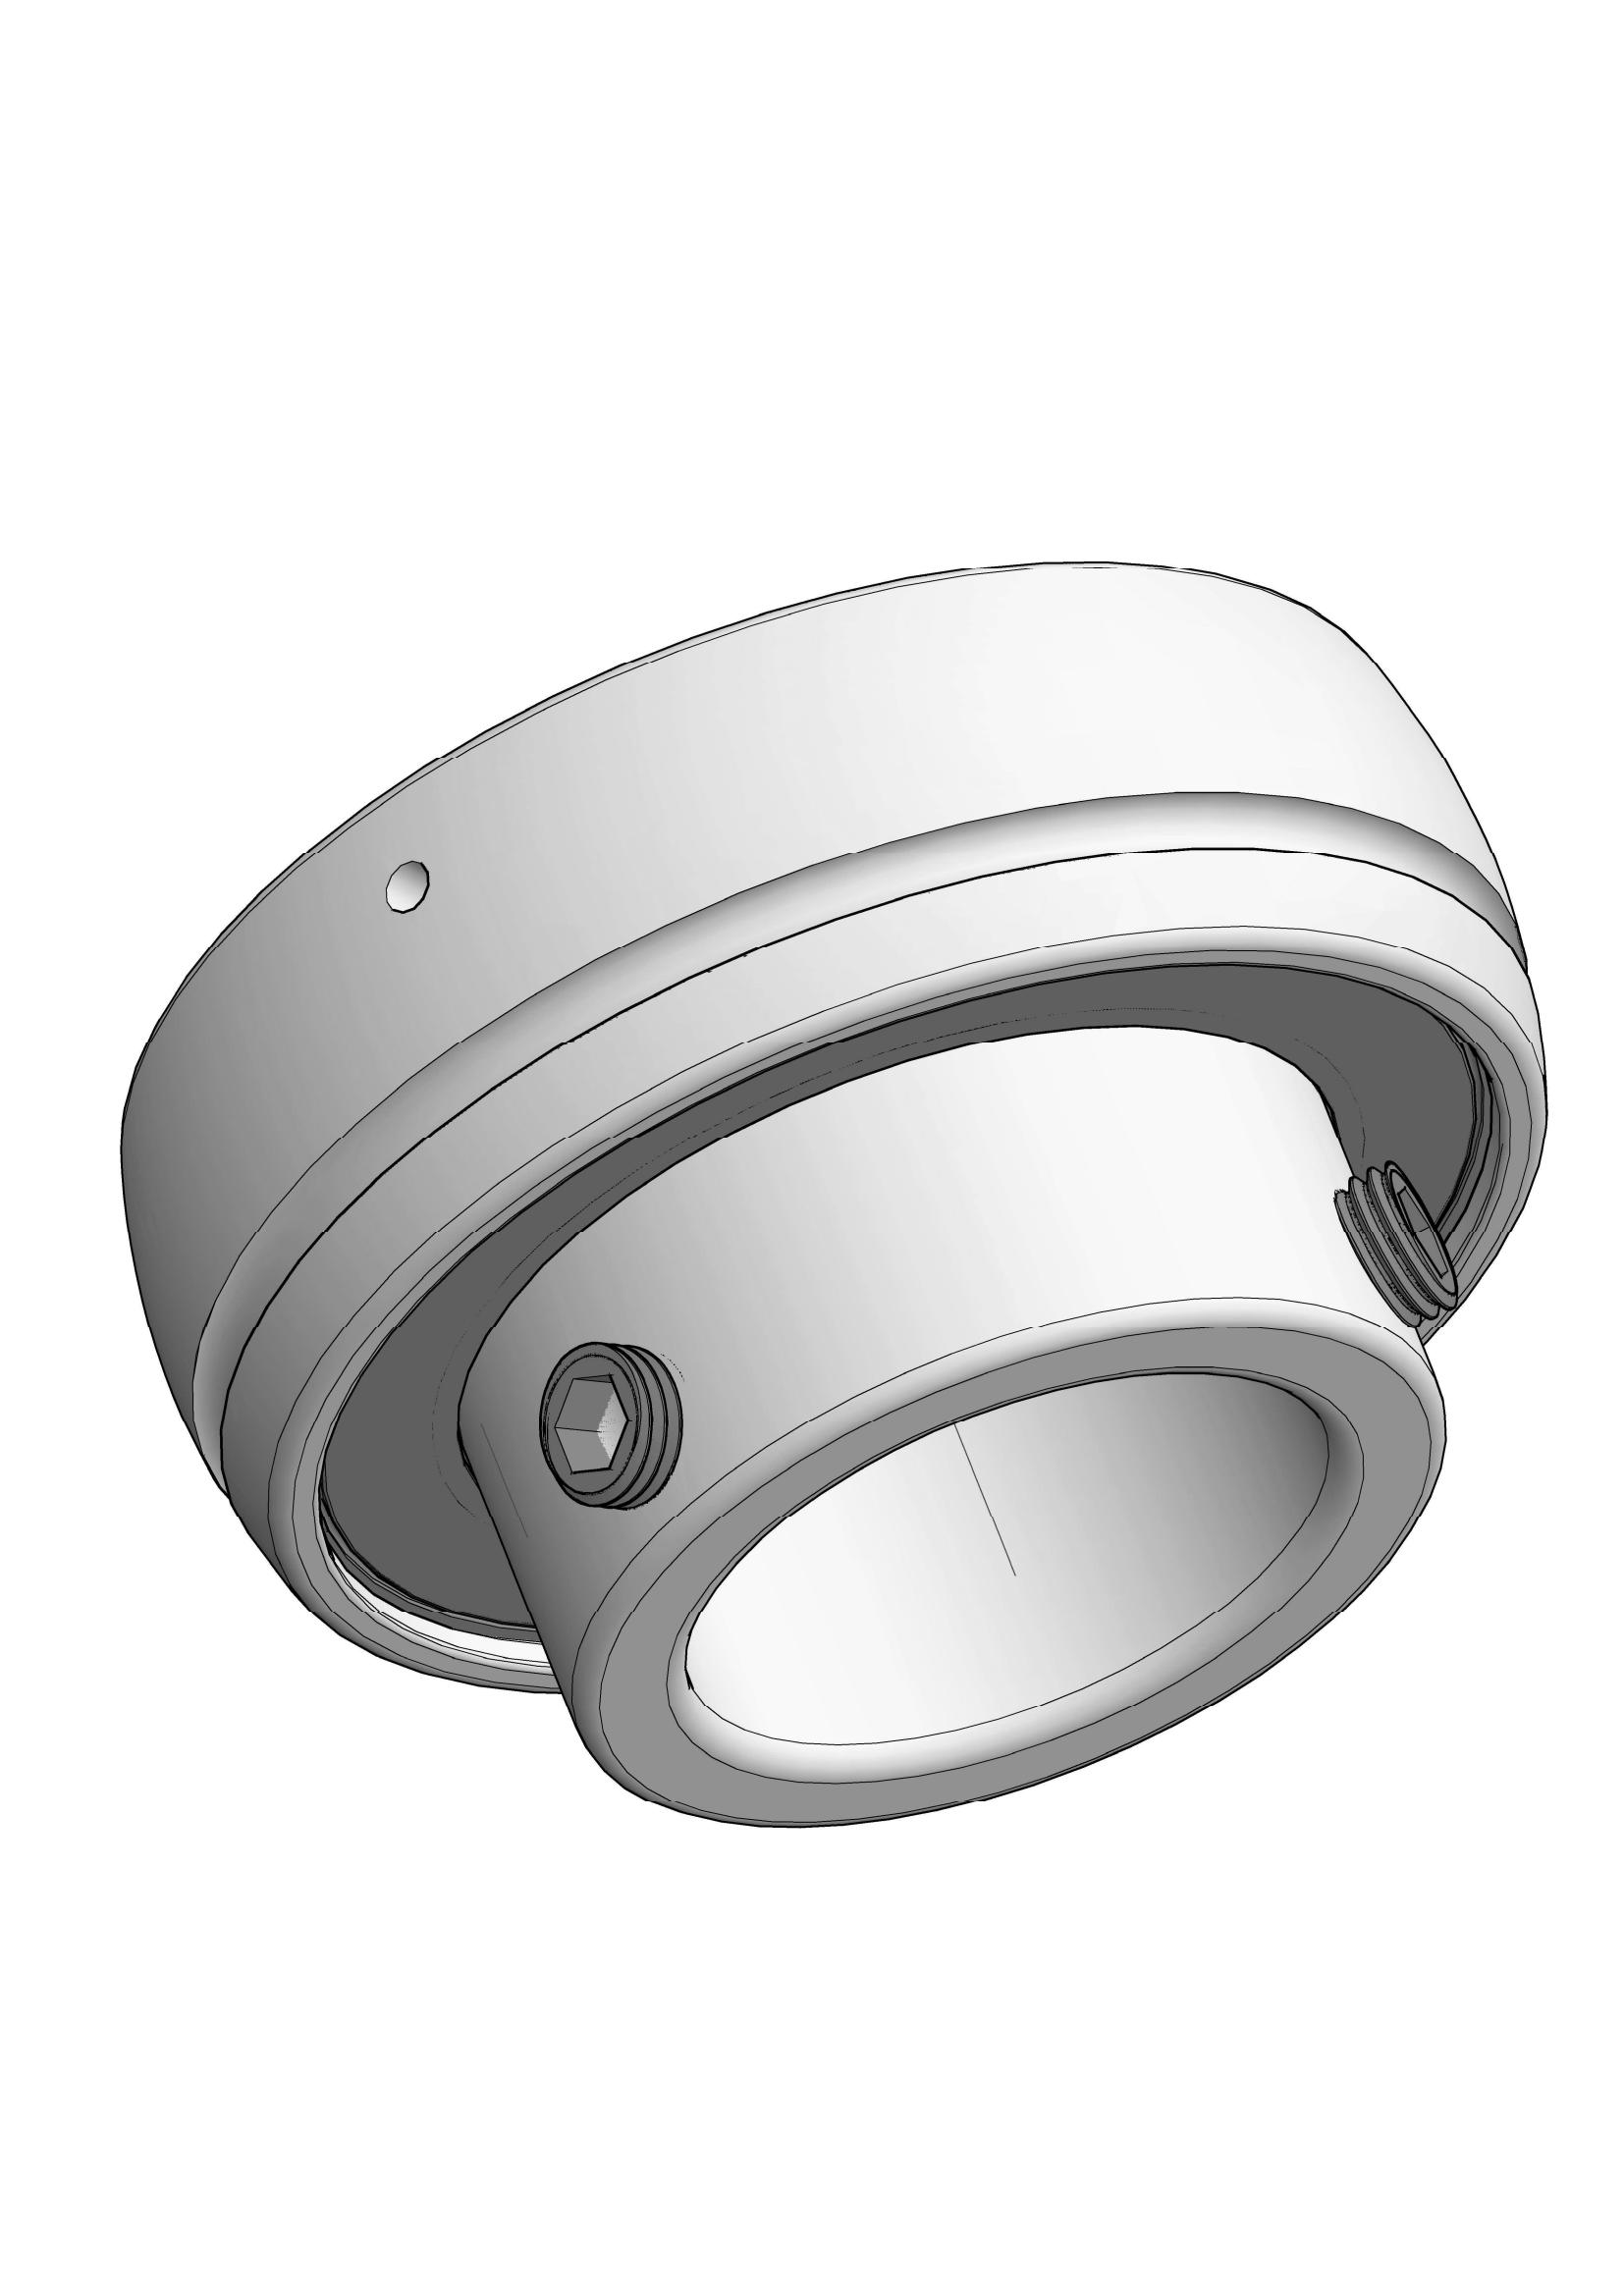 SB210-31 insert ball bearings with Eccentric Collar Lock with 1-15/16 inch Bore